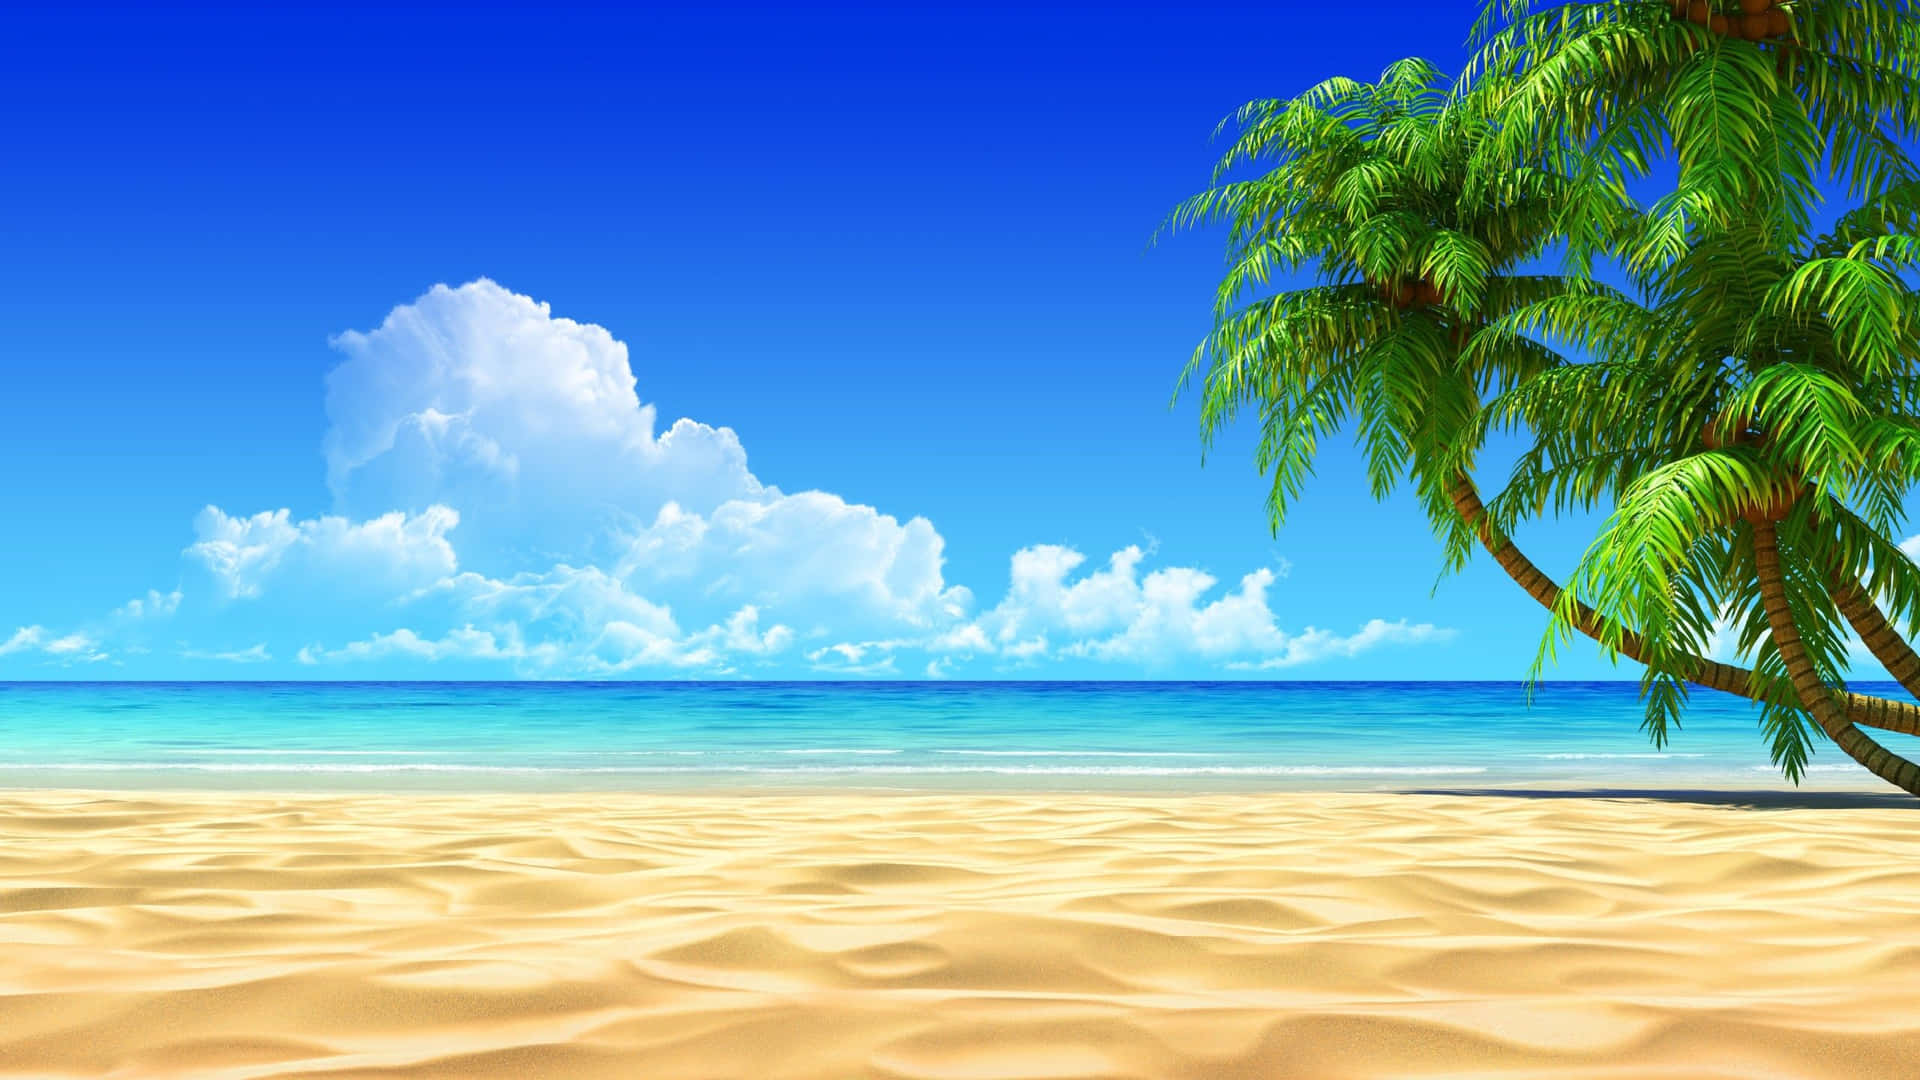 Join Us on the Beach and Find Your Own Piece of Paradise Wallpaper